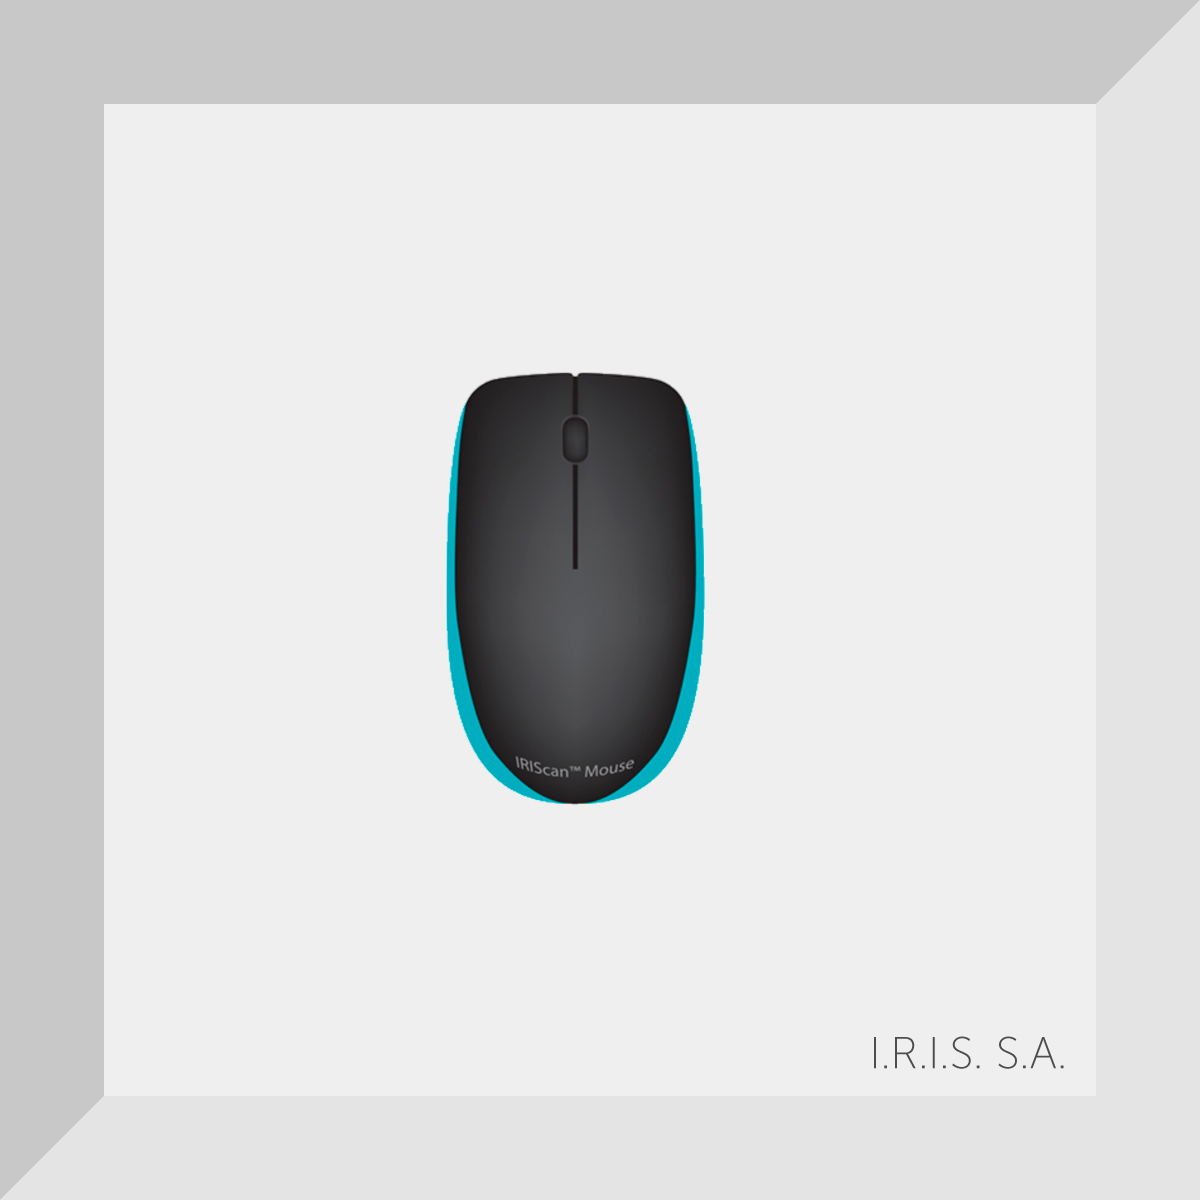 IRIScan mouse